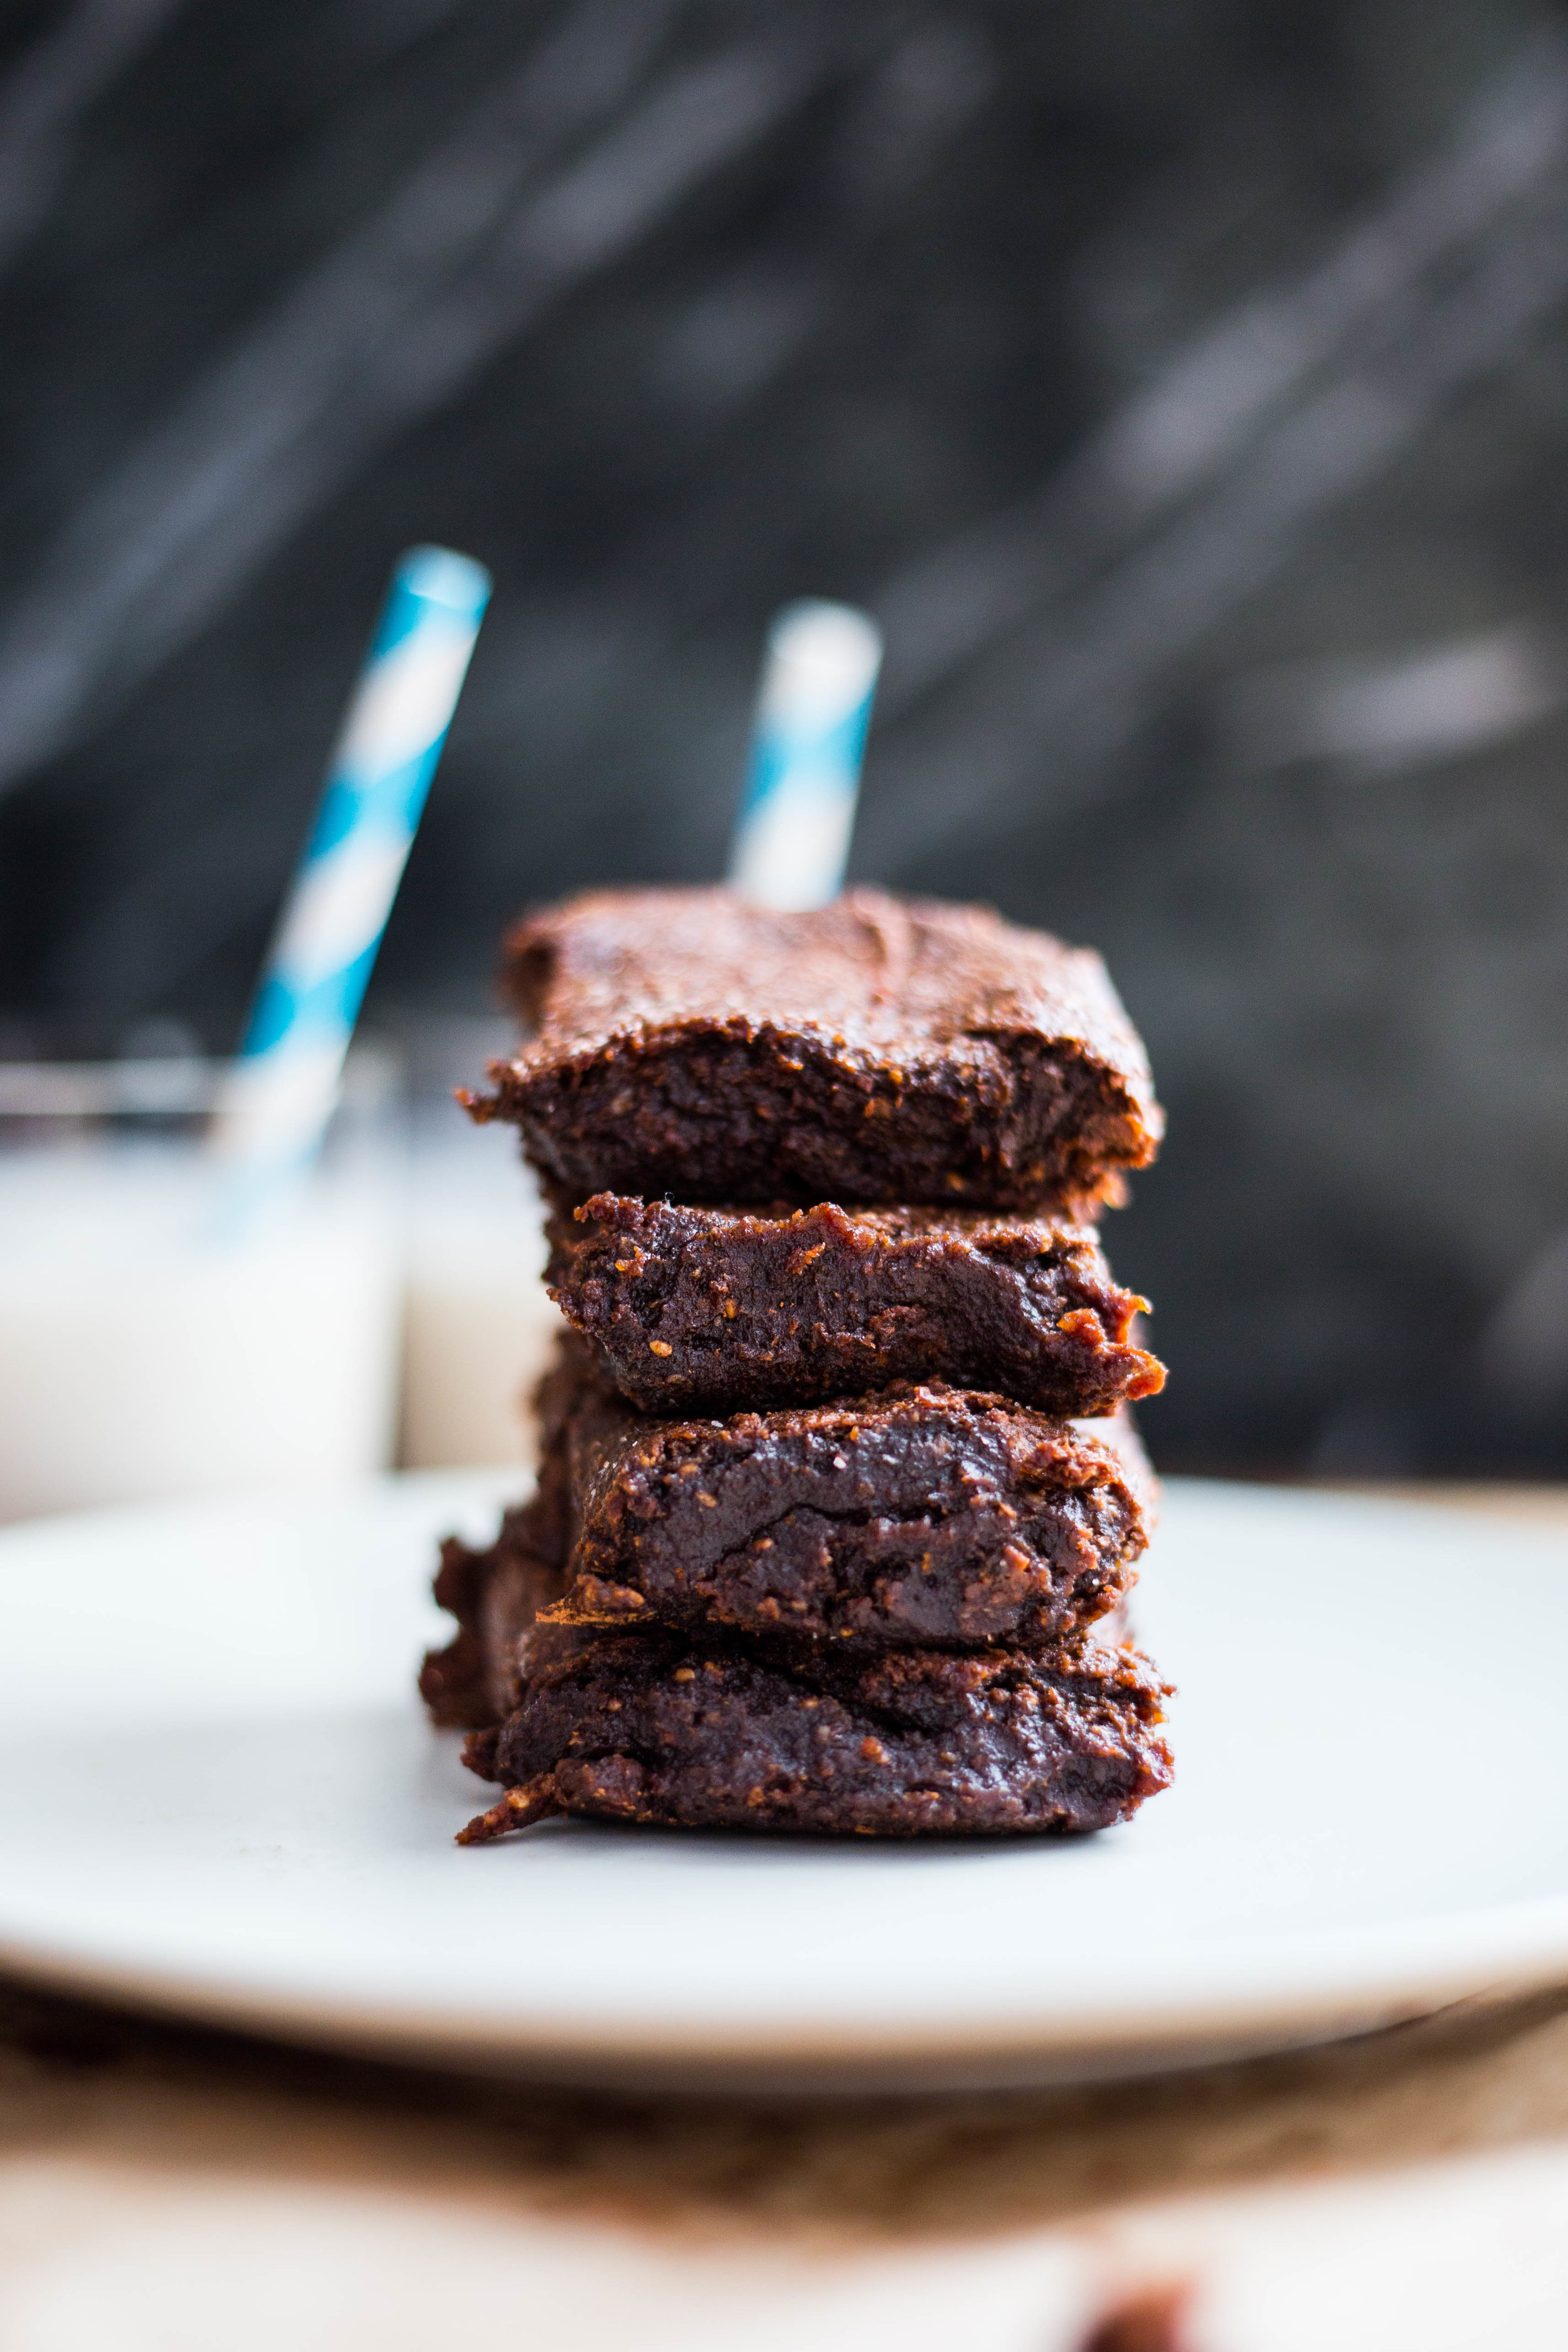 Tahini Chickpea Brownies | High Protein Plant-based | Gluten-free Grain-free egg-free | Kid Approved #purekitchenblog